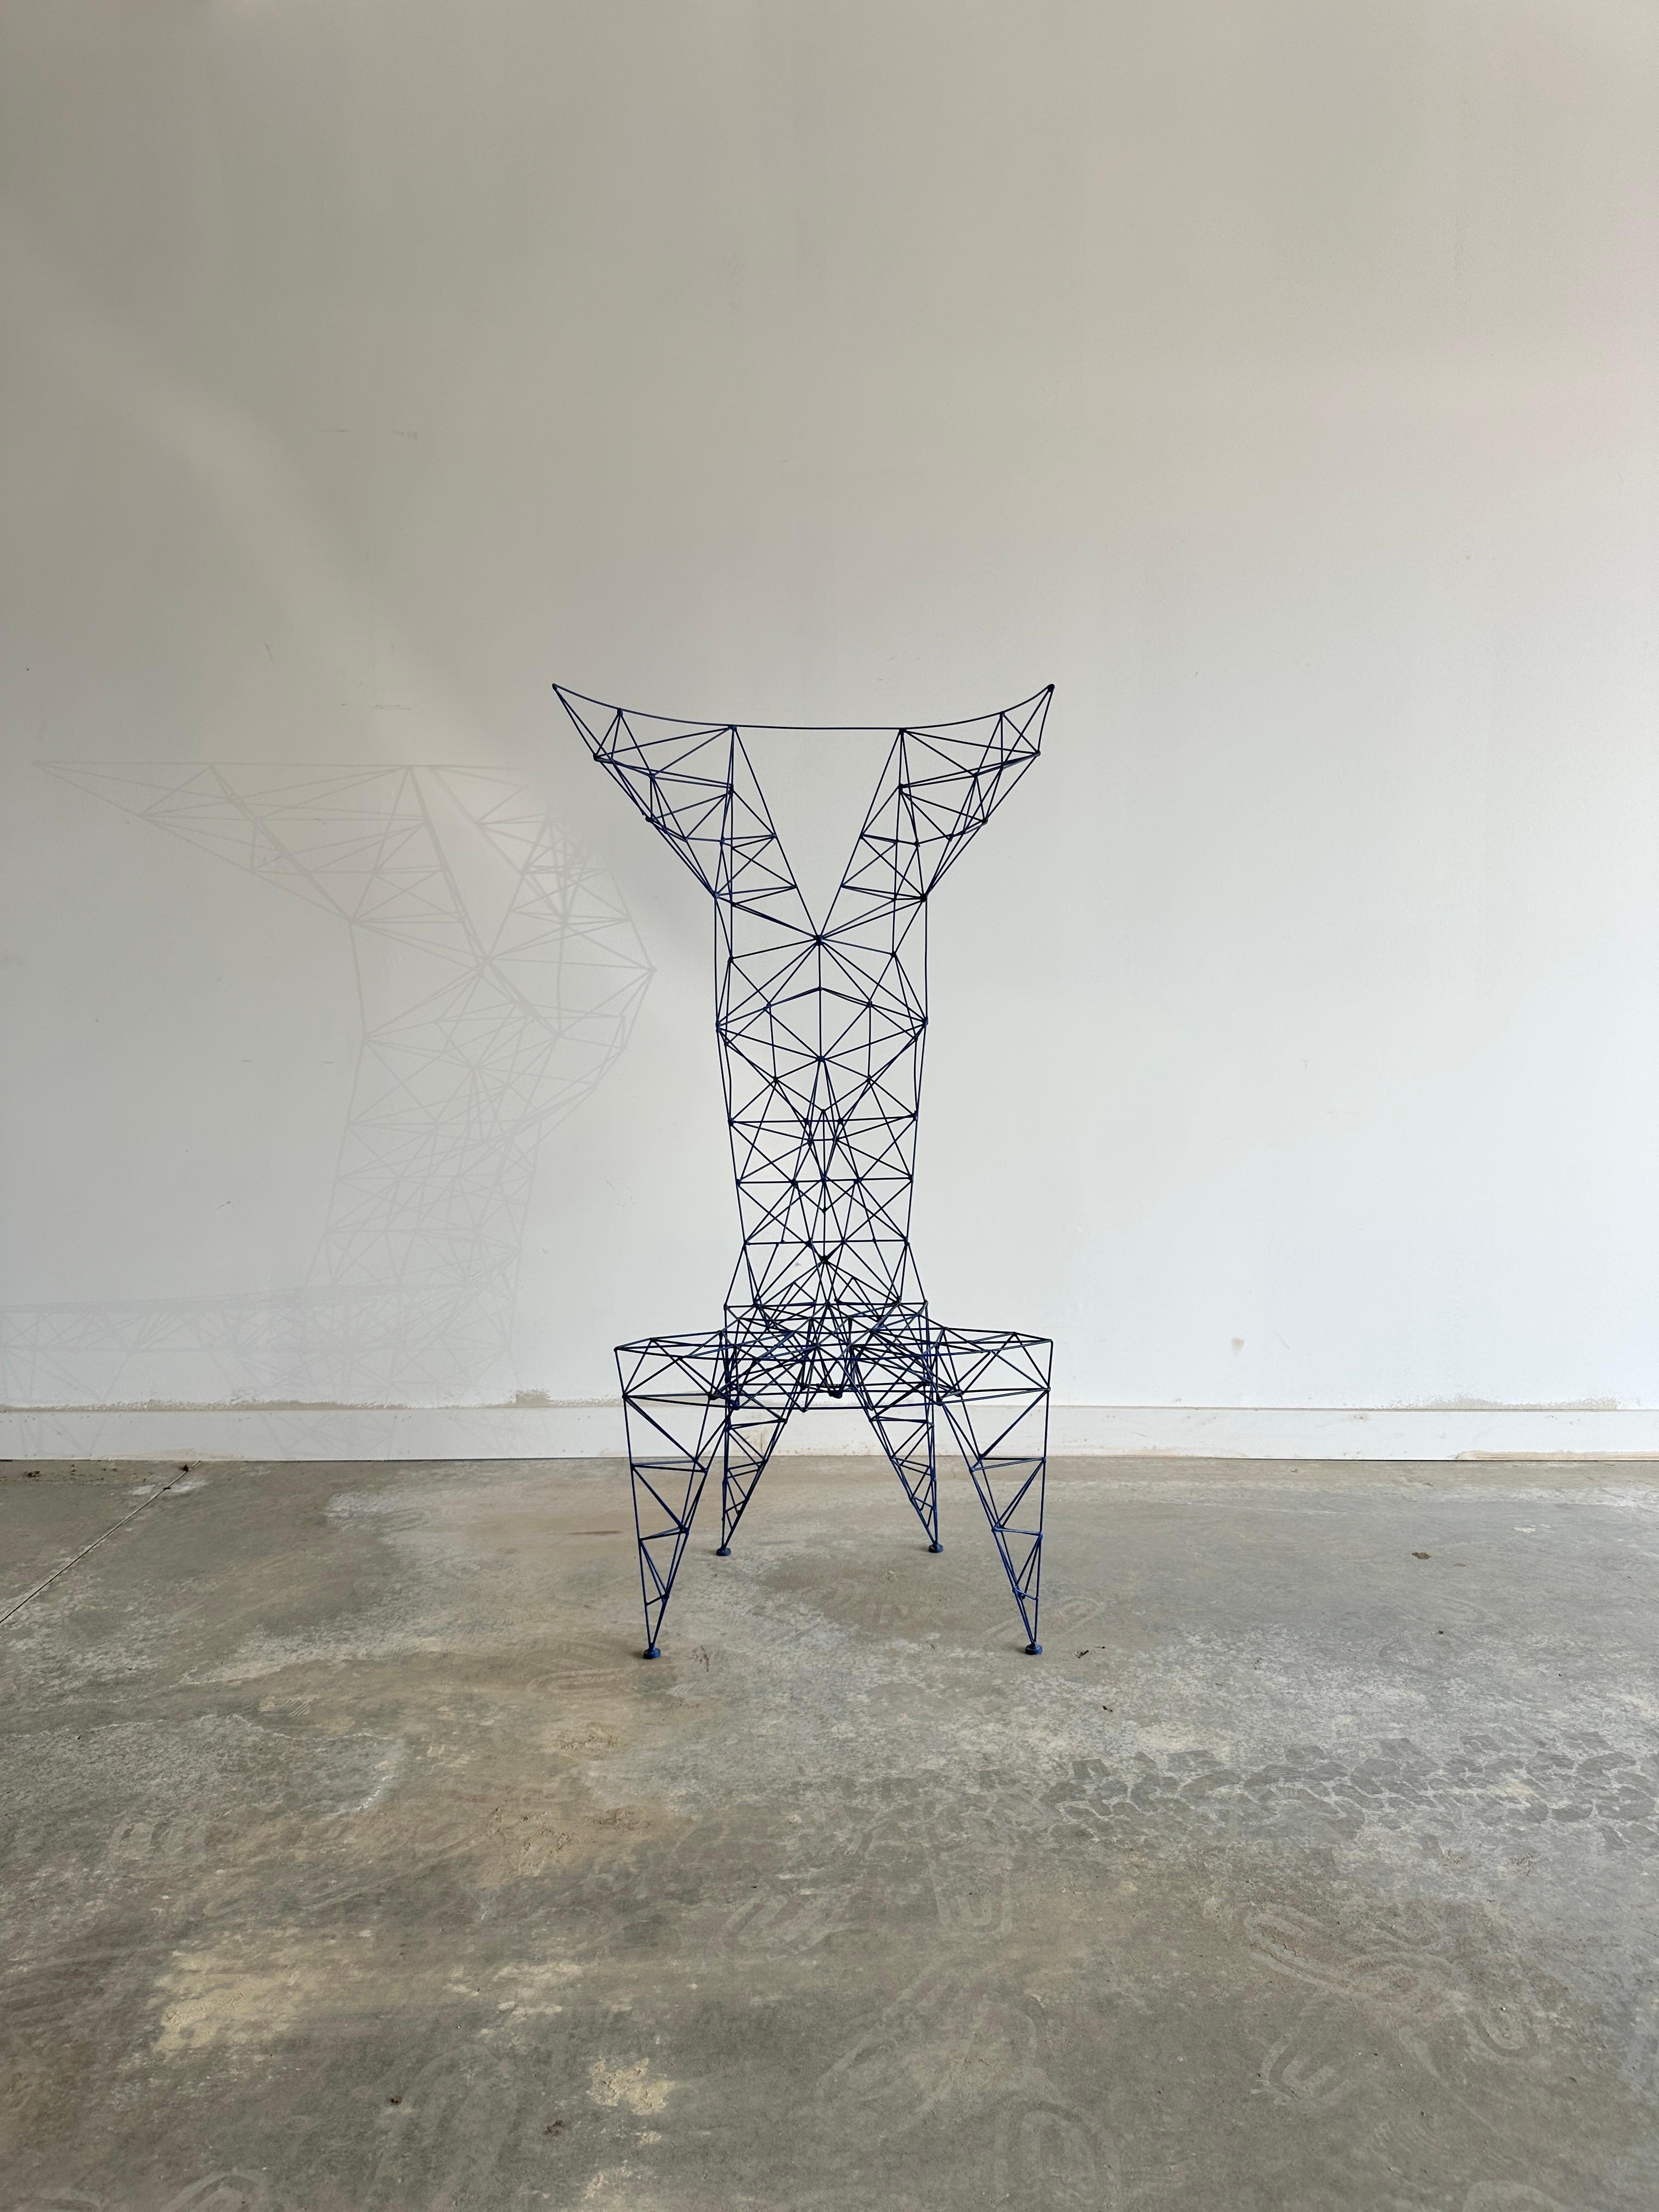 This striking chair is a creation of Tom Dixon, inspired by the industrial structures and bridges of London. The chair is made of hand-welded copper-plated steel rods, forming a geometric lattice. Dixon’s impetus for the Pylon chair was to design